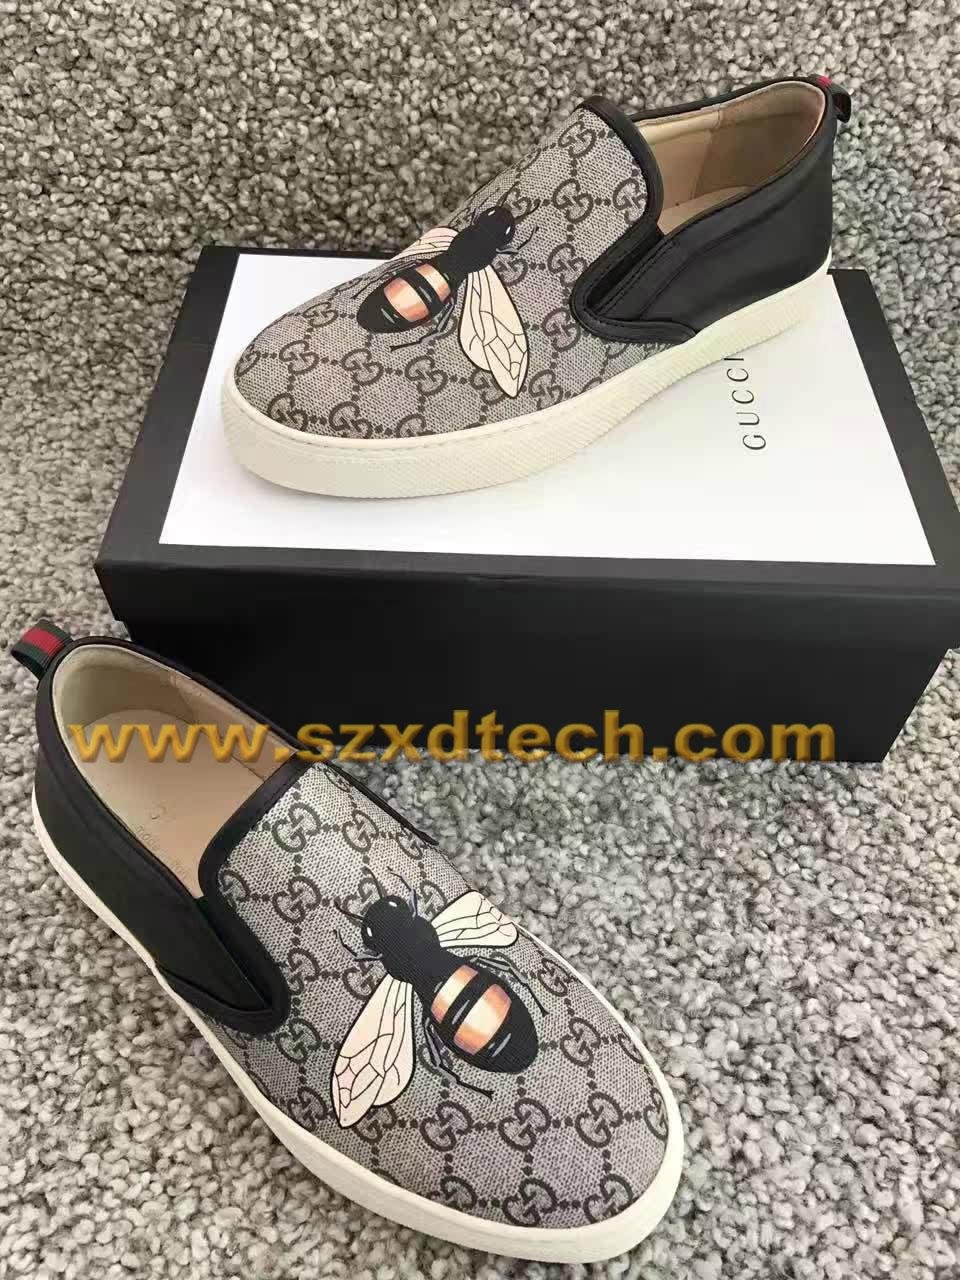 Wholesale Gucci Shoes Men Loafers Gucci shoes High Quality replica cucci shoes - XD-Gucci 3 ...